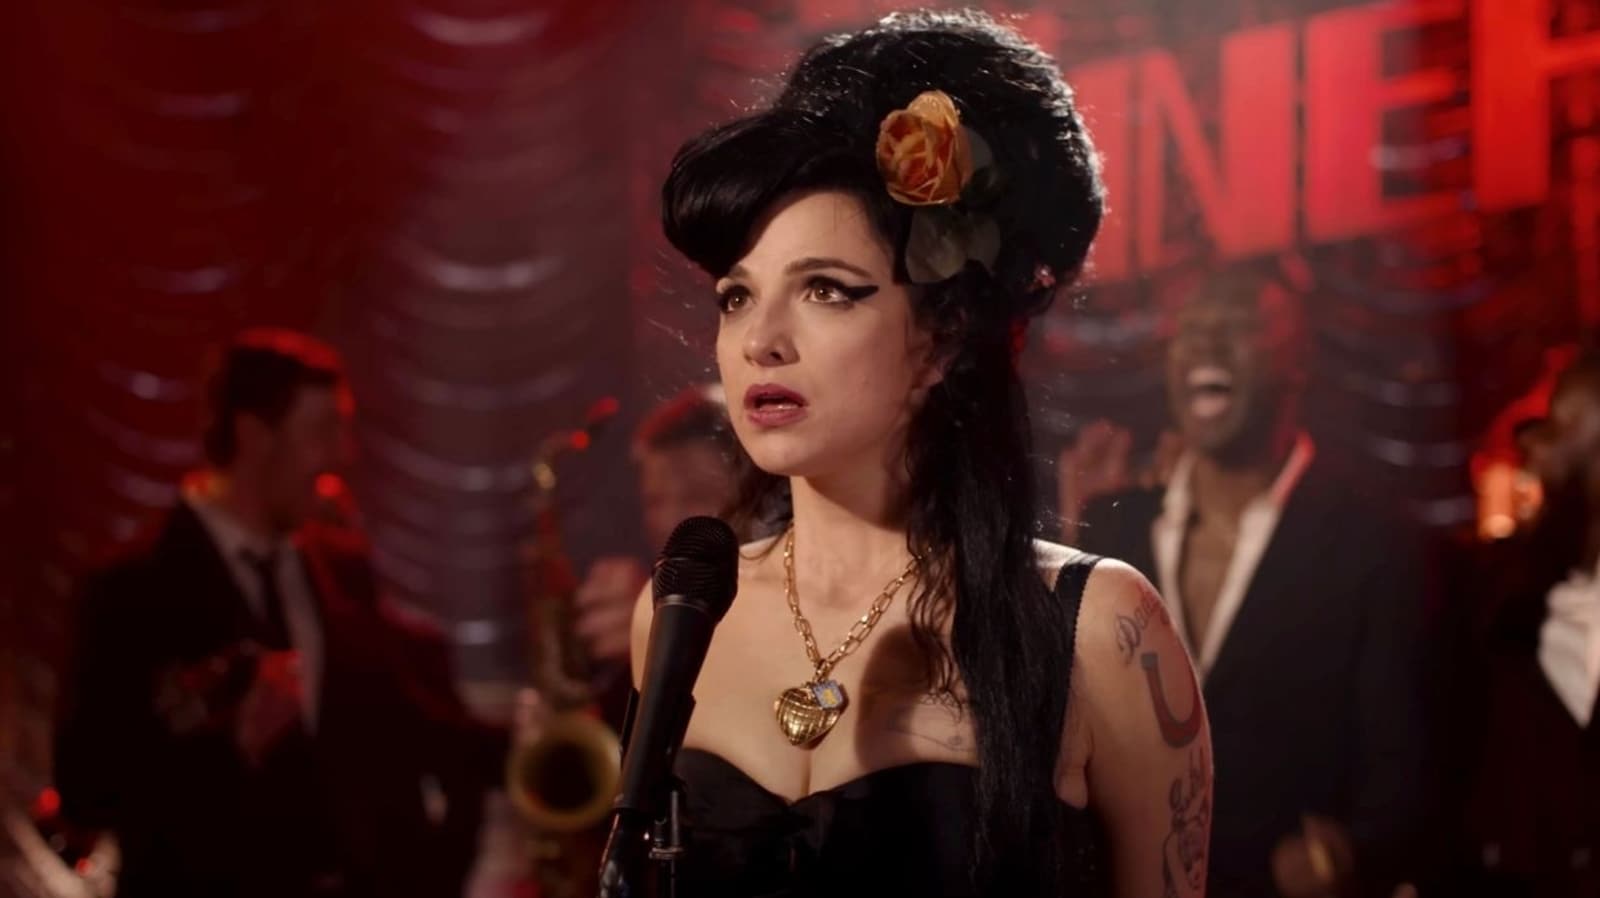 Back to Black trailer: Marisa Abela embodies Amy Winehouse in her biopic. Watch | Hollywood